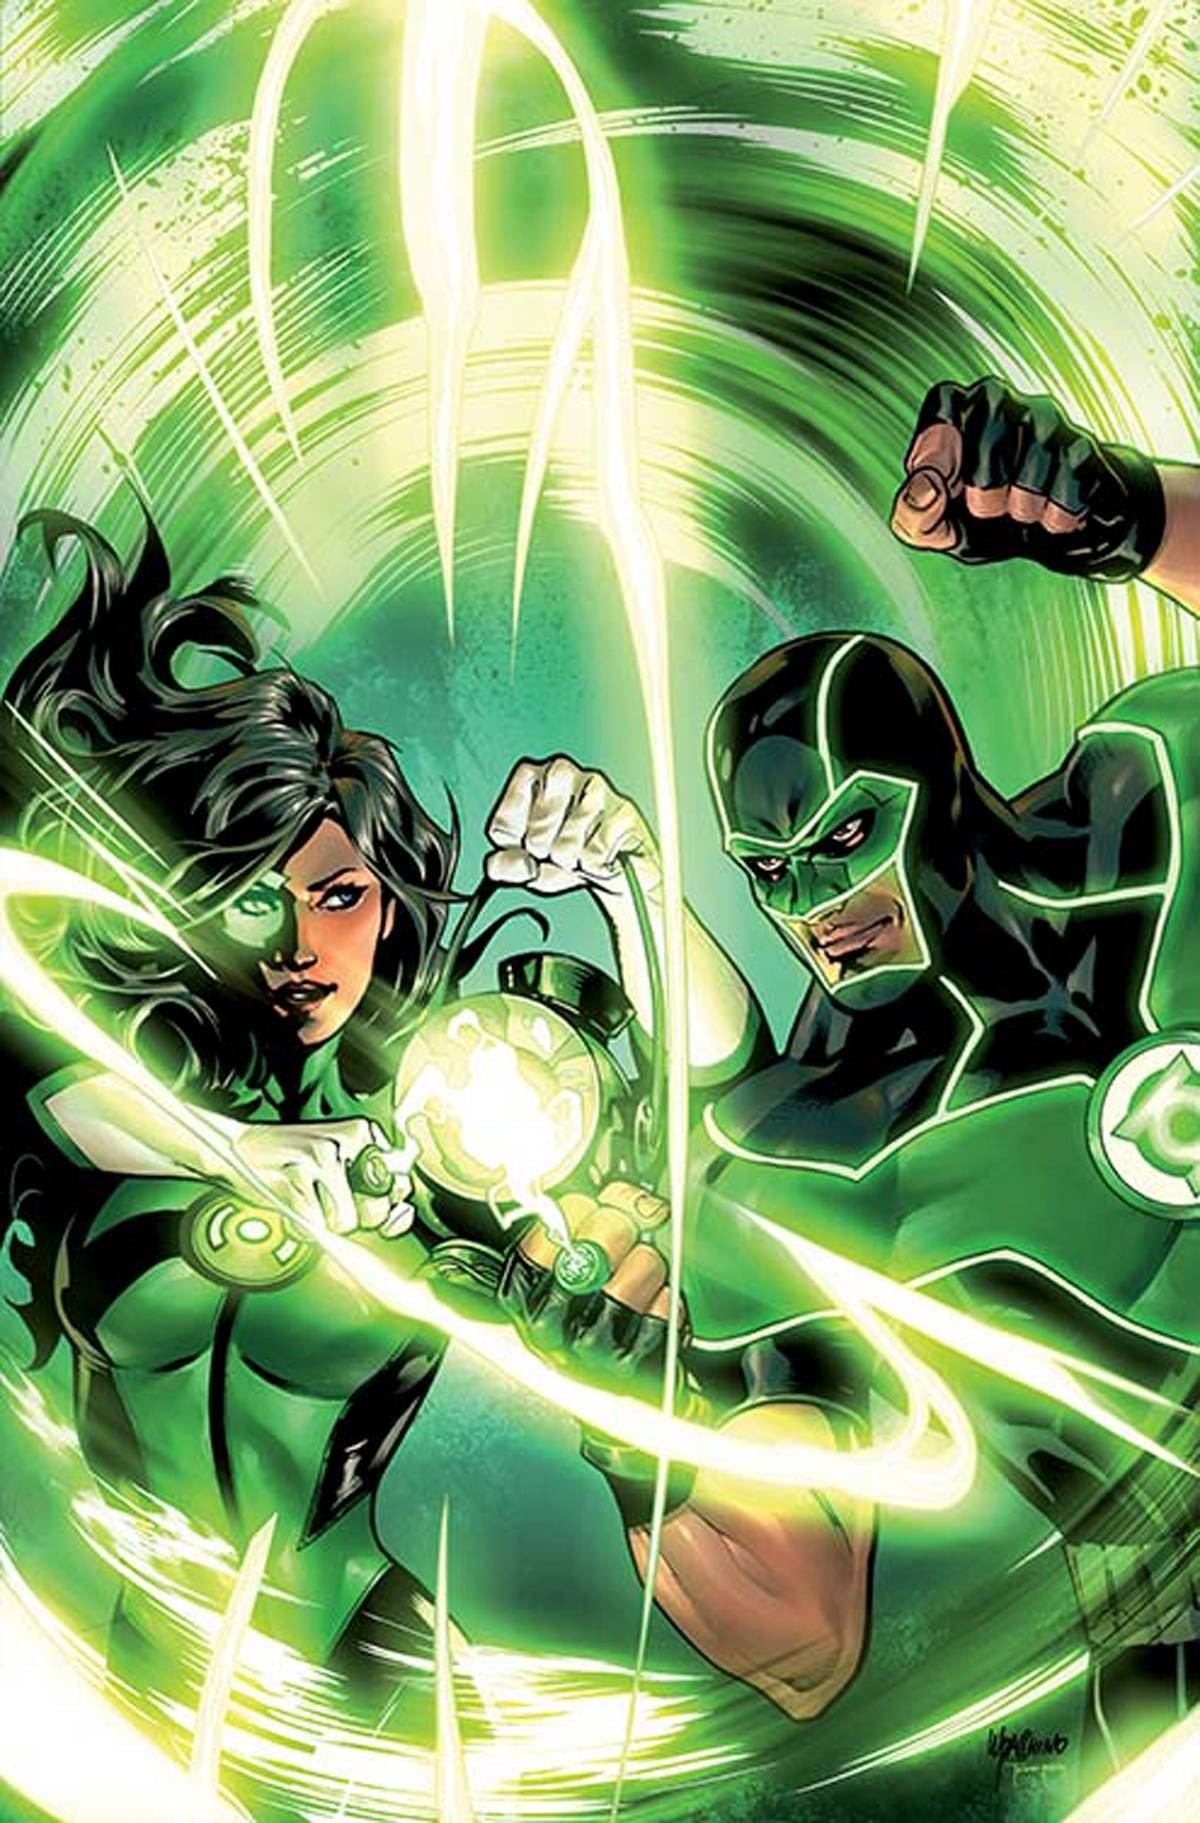 Details about   GREEN LANTERNS #13 VARIANT COVER BY EMANUELA LUPACCHINO 